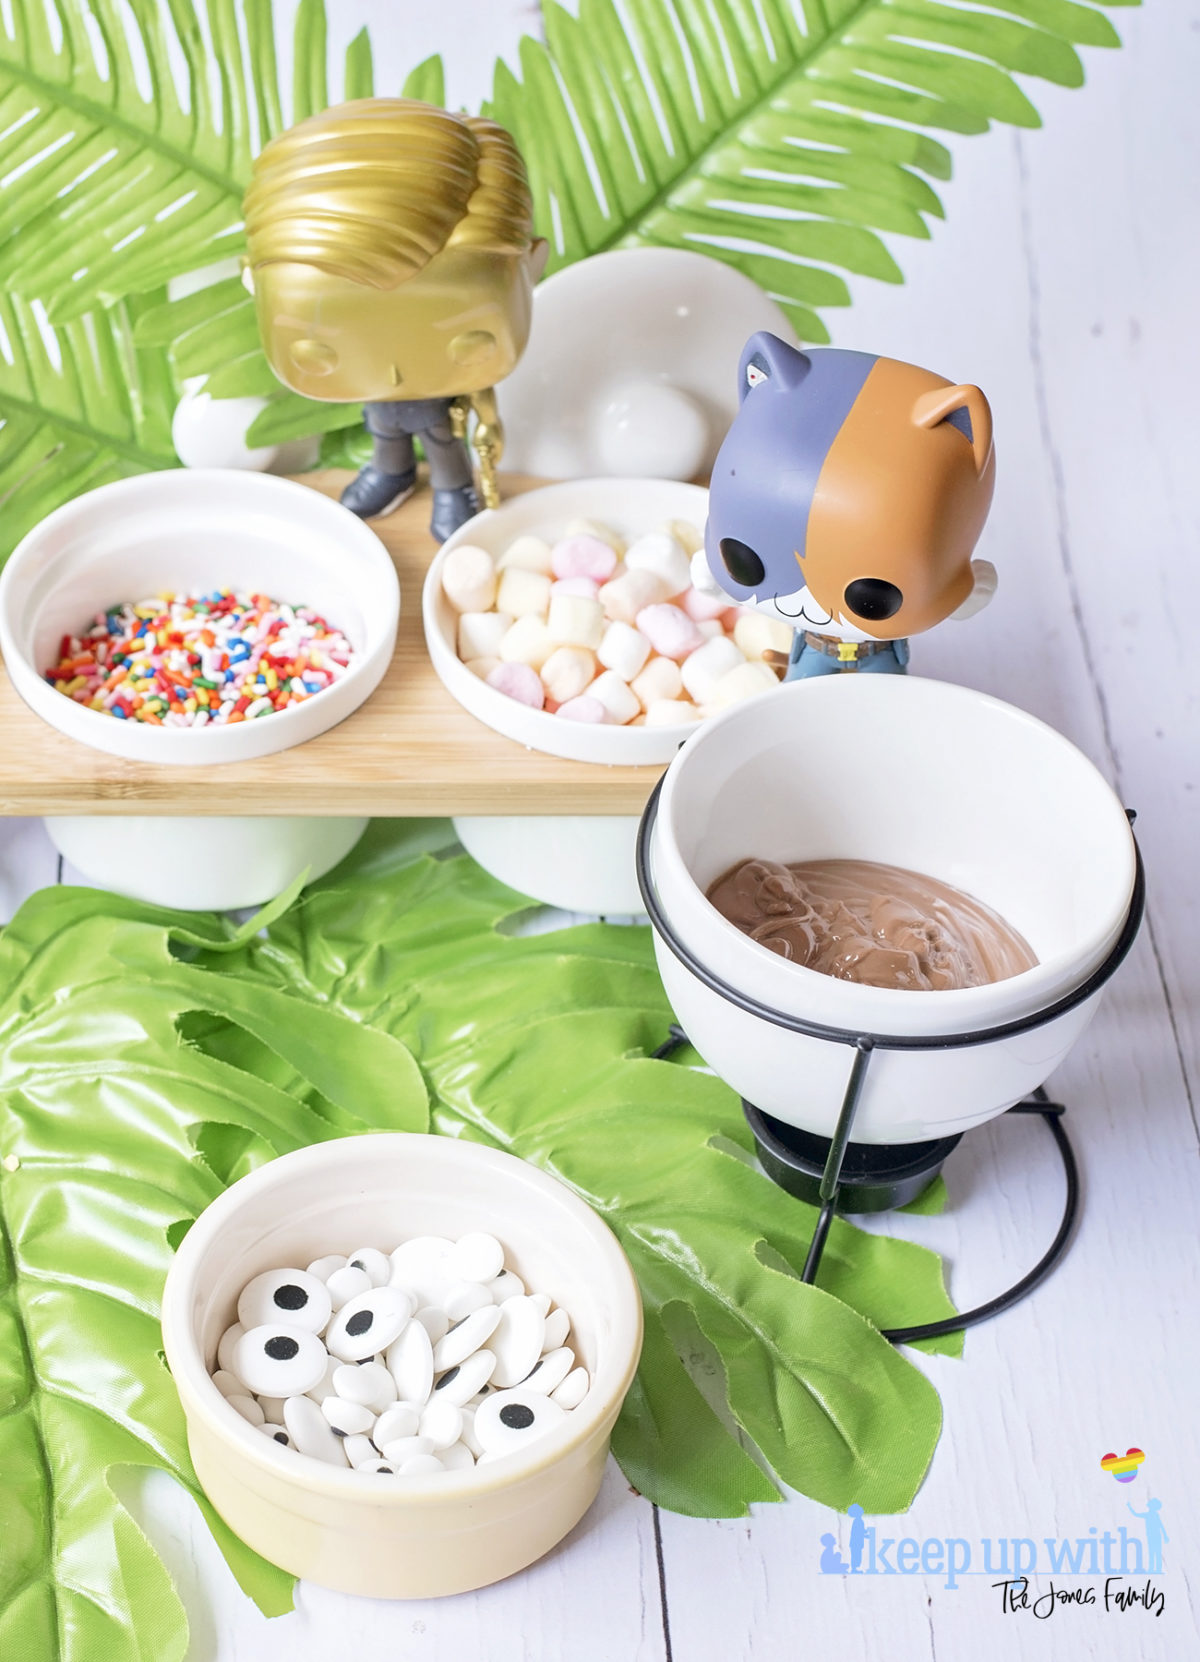 Image shows Peely’s Banana Fortnite Fondue Bar, fun food for families. A Funko Pop Vinyl Meowscles and Midas stand on a fondue bar next to dishes of fondue toppings including edible eyes, sprinkles, mini marshmallows and peanut butter drops. Image by Sara-Jayne from Keep Up With The Jones Family.